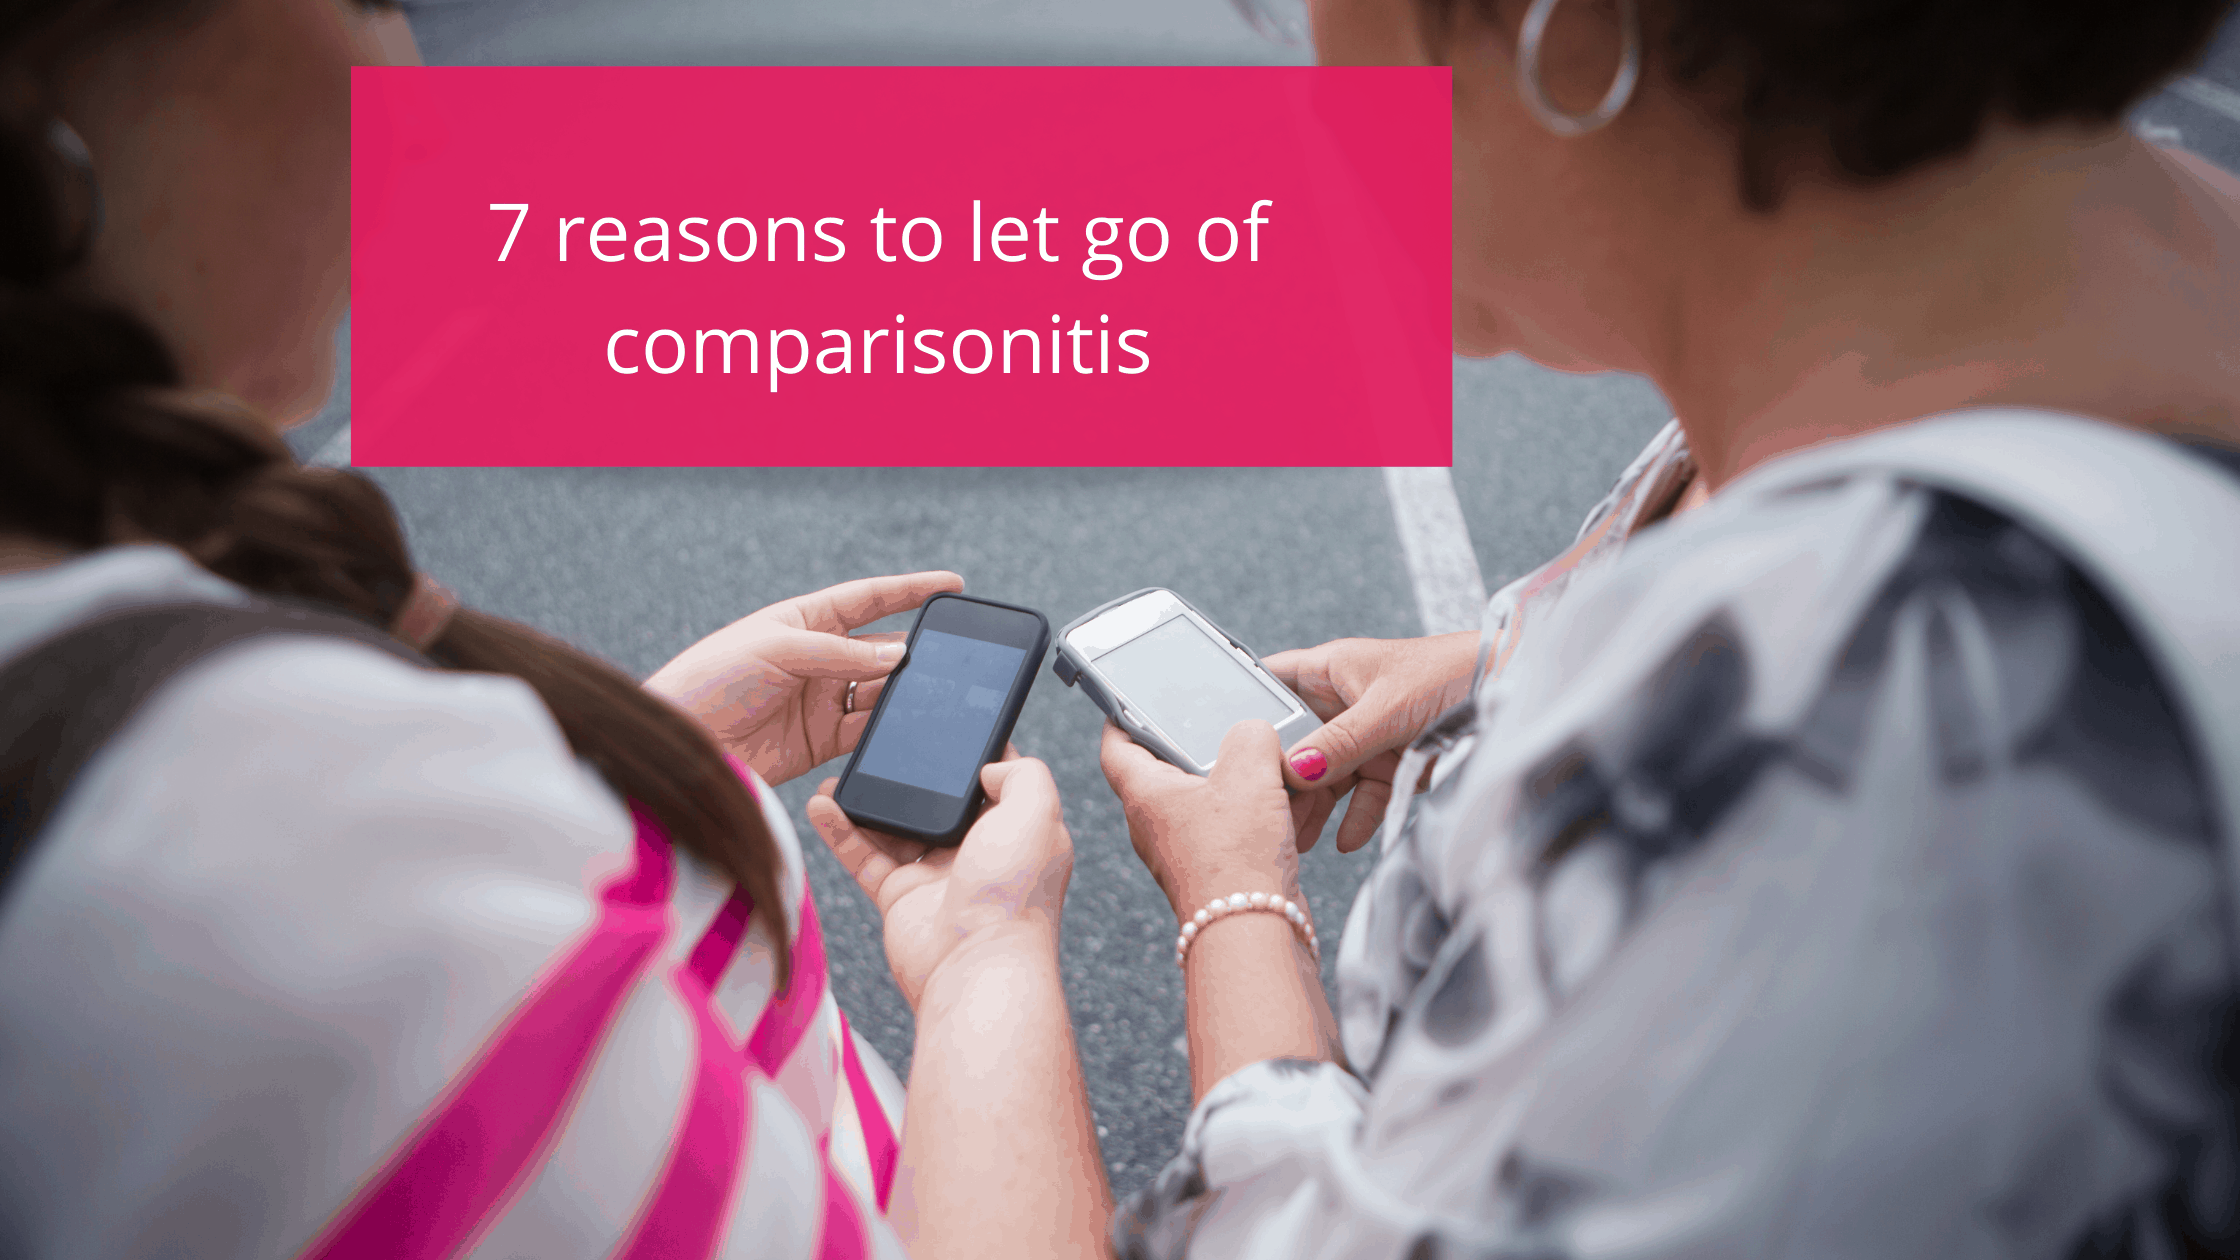 7 reasons to let go of comparisonitis